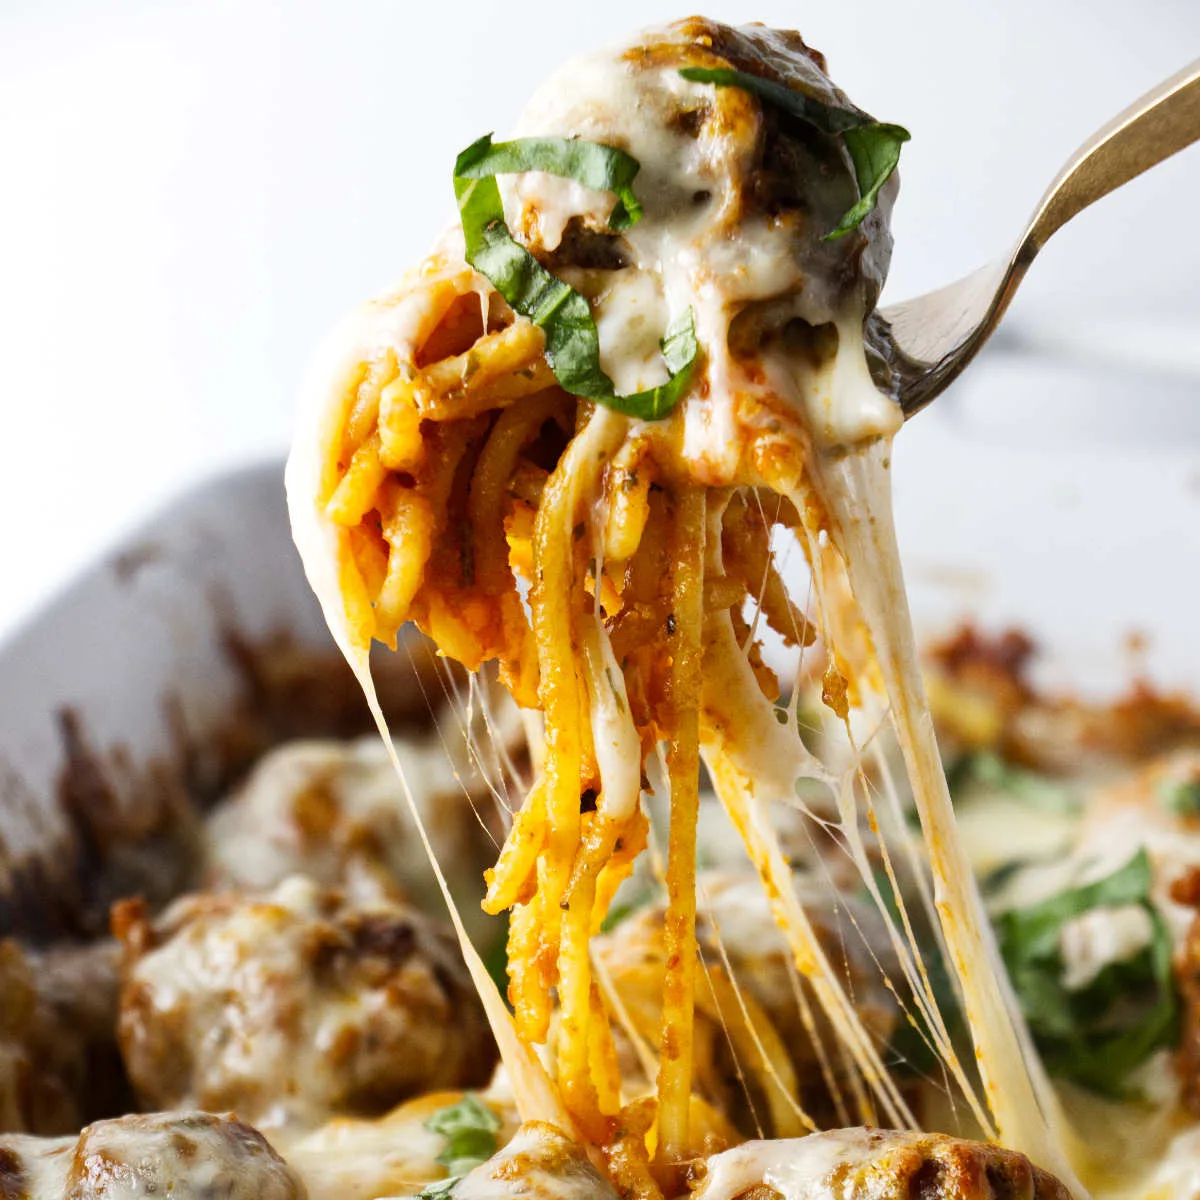 A serving of baked spaghetti with stretchy melted cheese and a meatball.